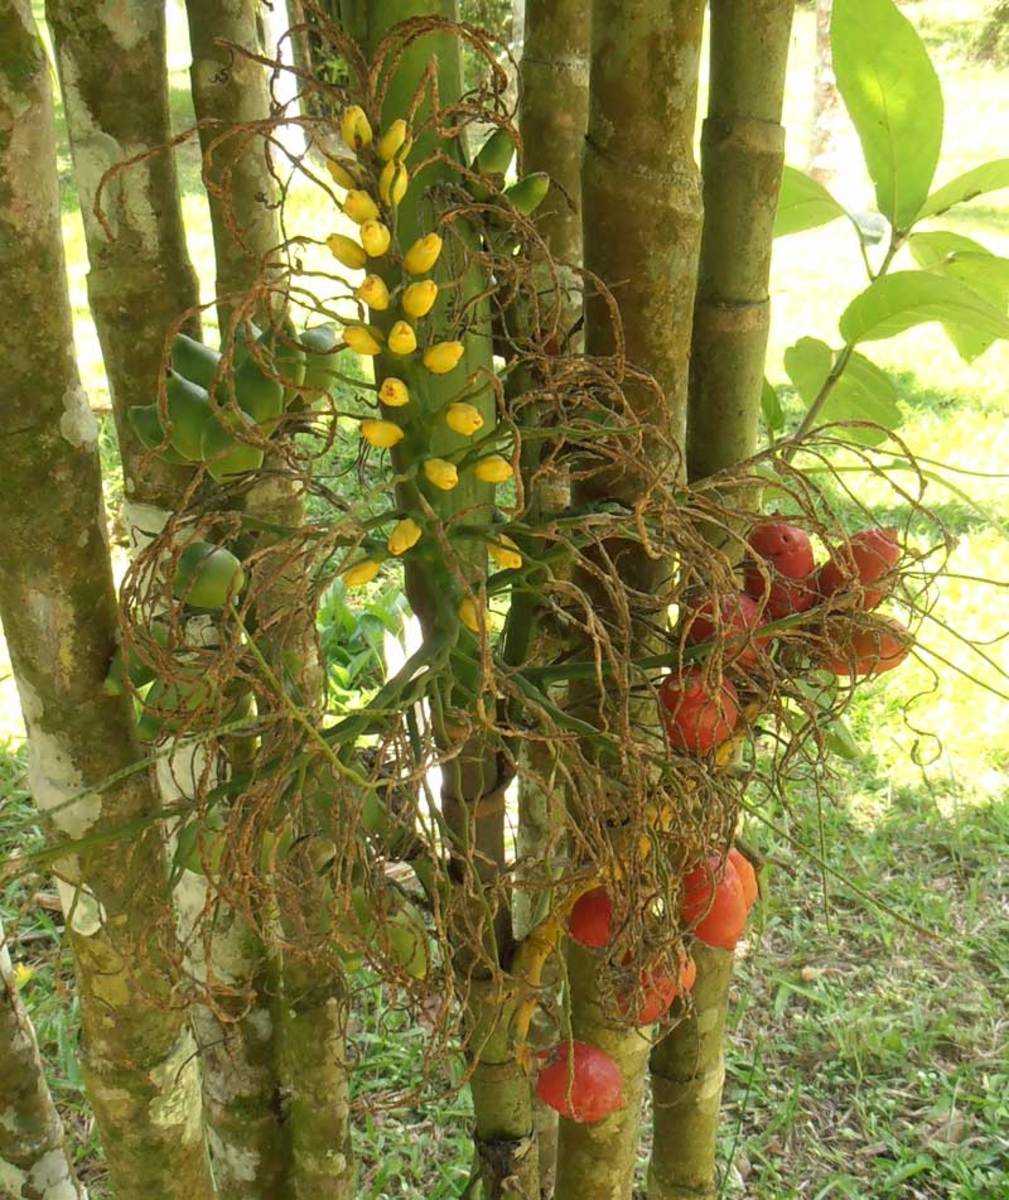 Large yellow flowers, young green fruit and mature fruit on a female palm plant.